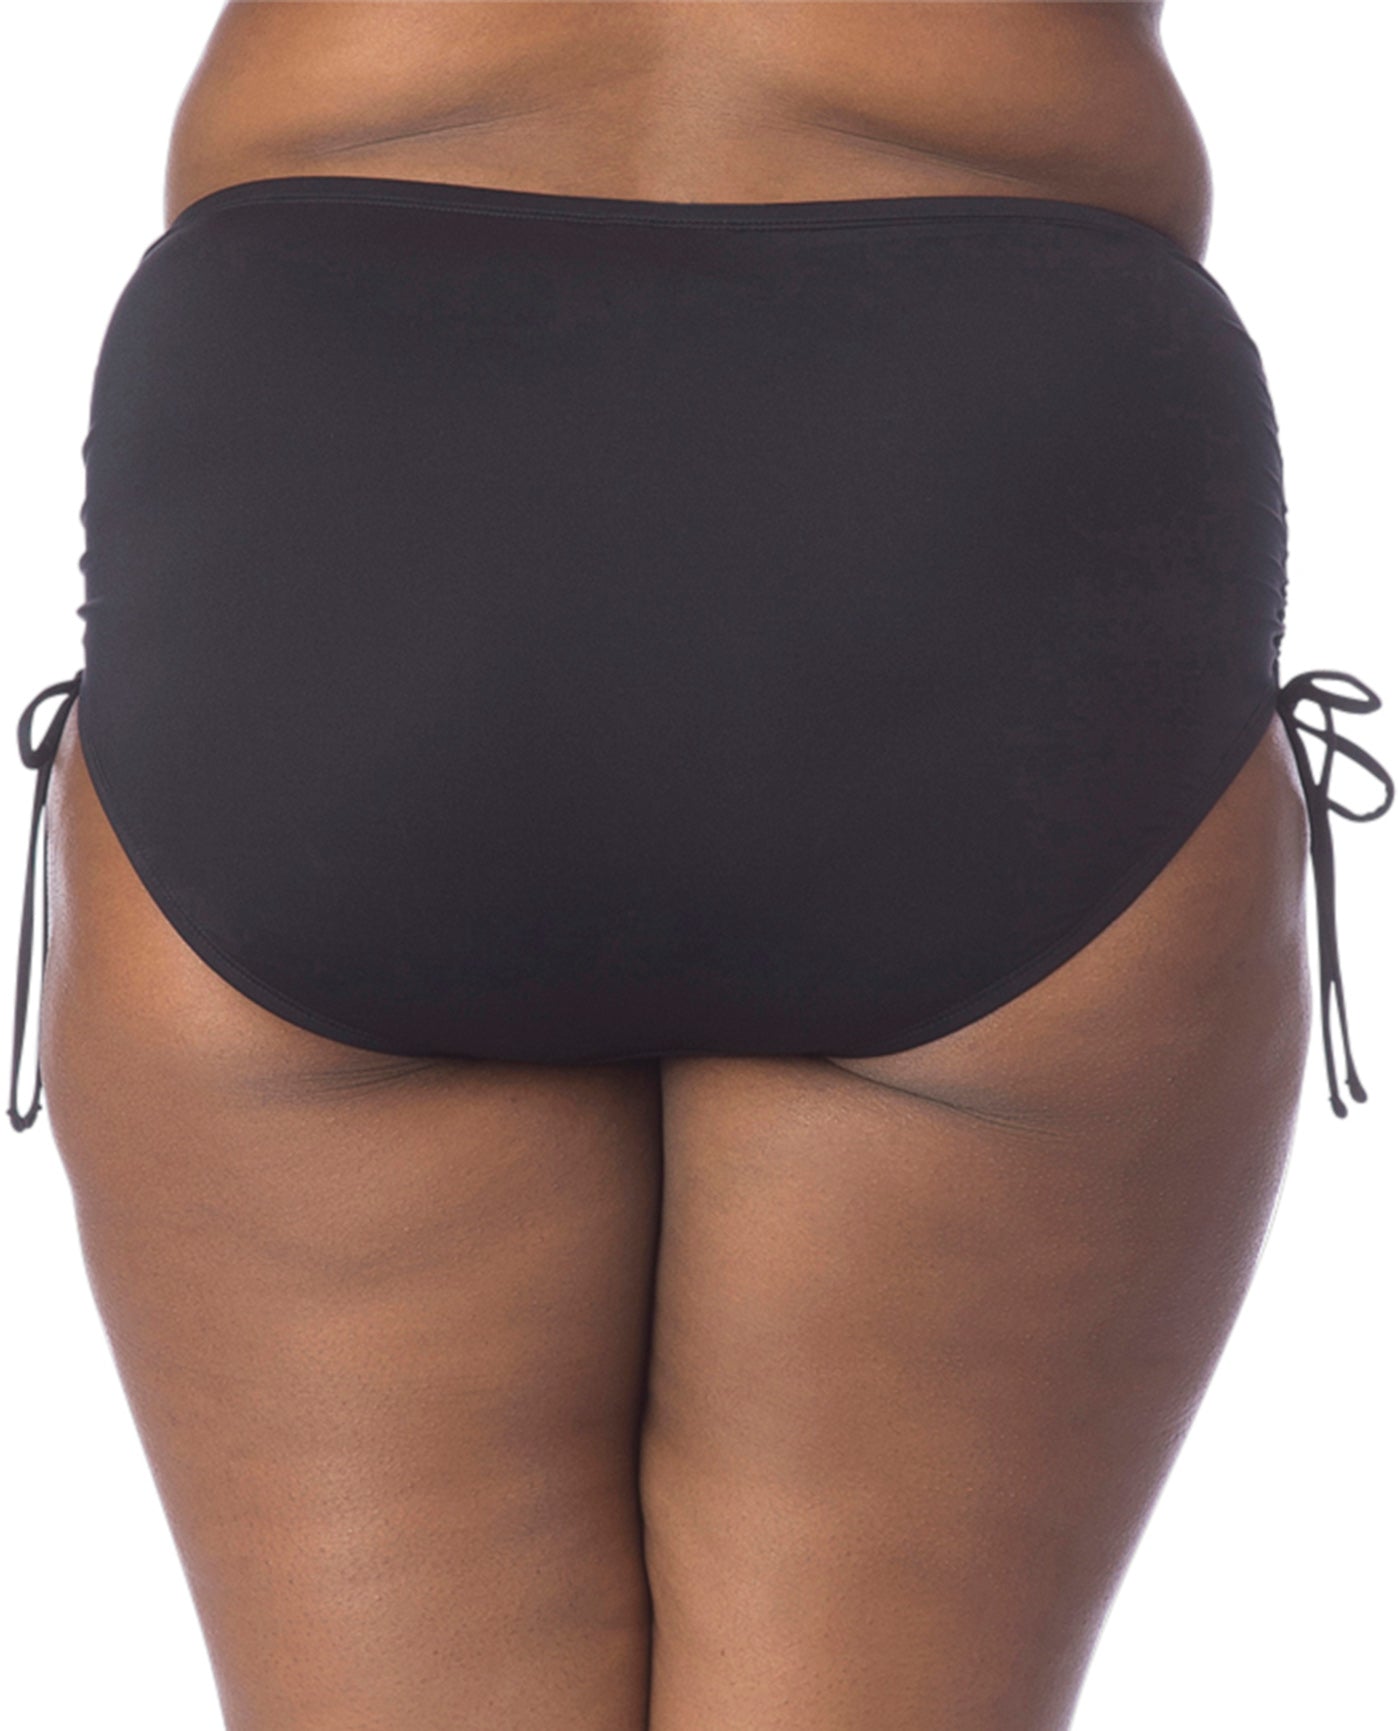 Back View Of Kenneth Cole Solid Black Plus Size Adjustable High Waist Tankini Bottom | KKC Solid Black